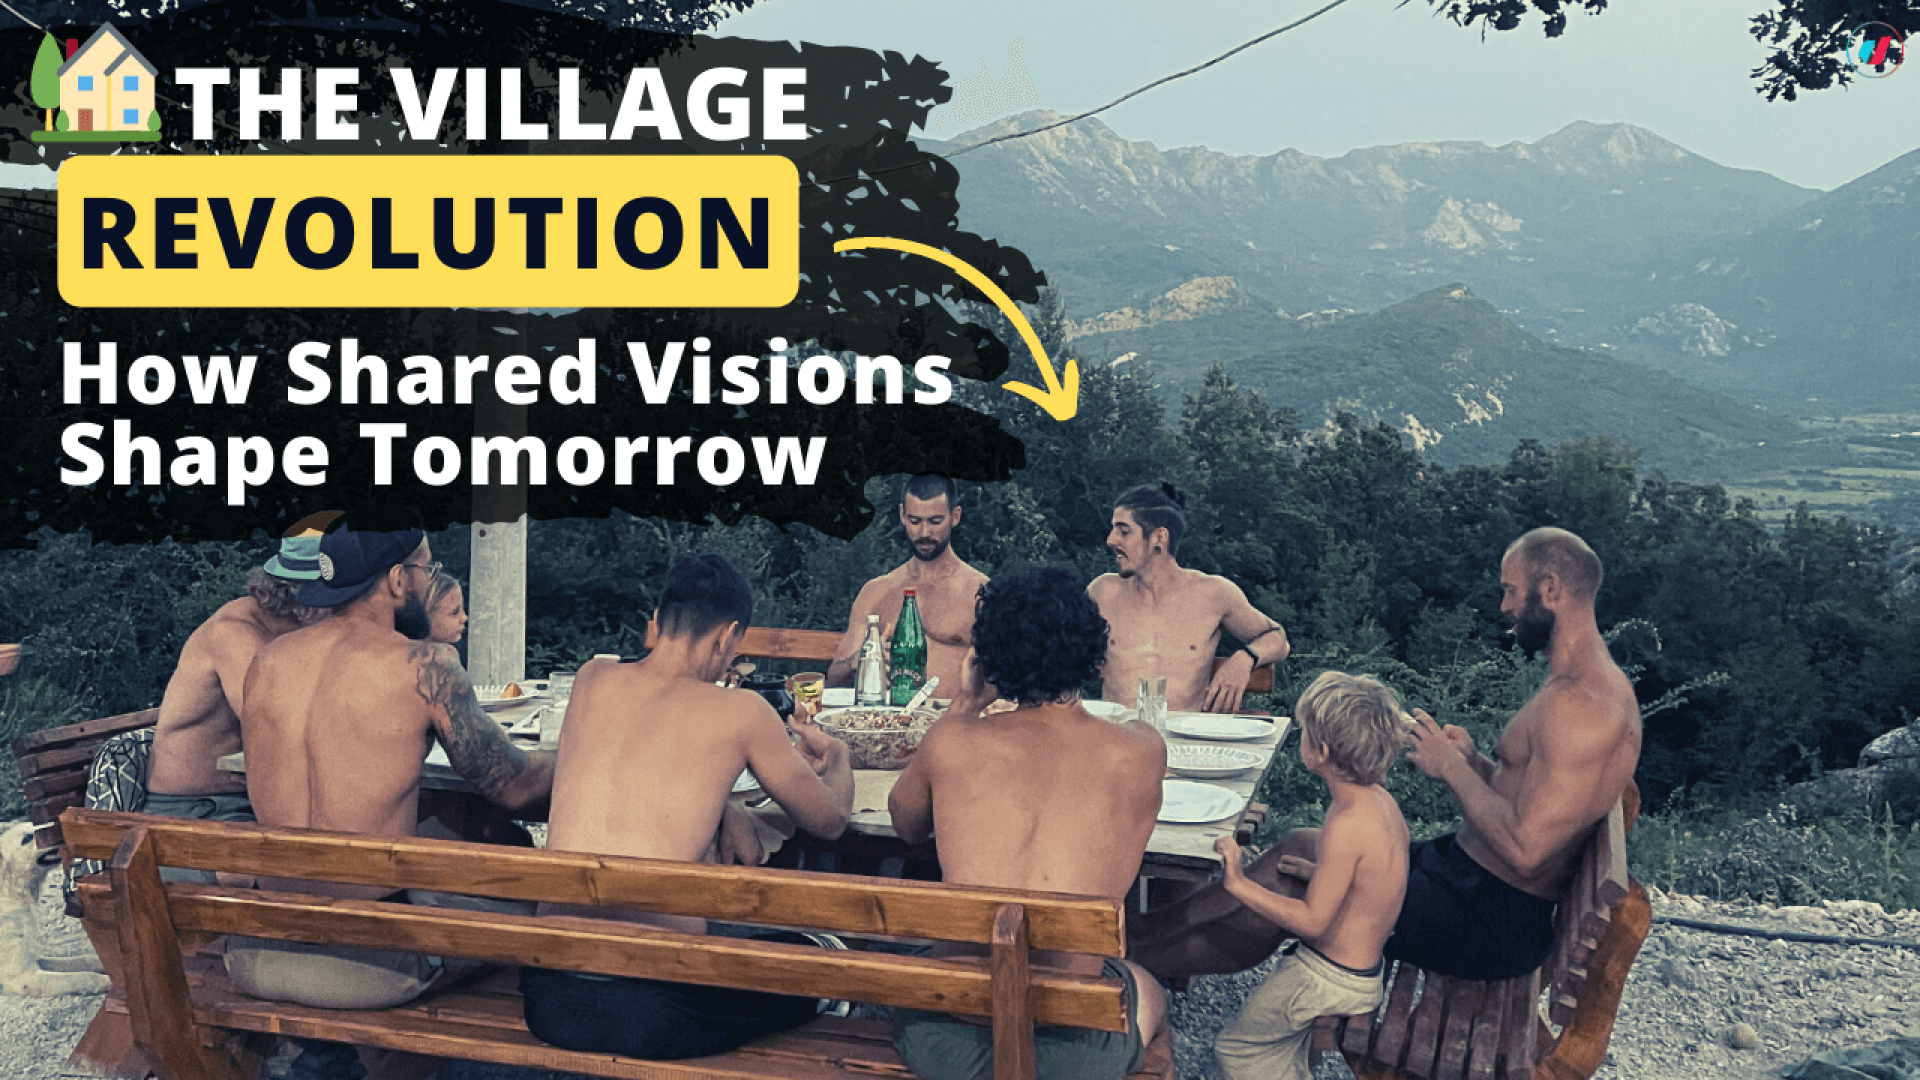 The Village Revolution How Shared Visions Shape Tomorrow